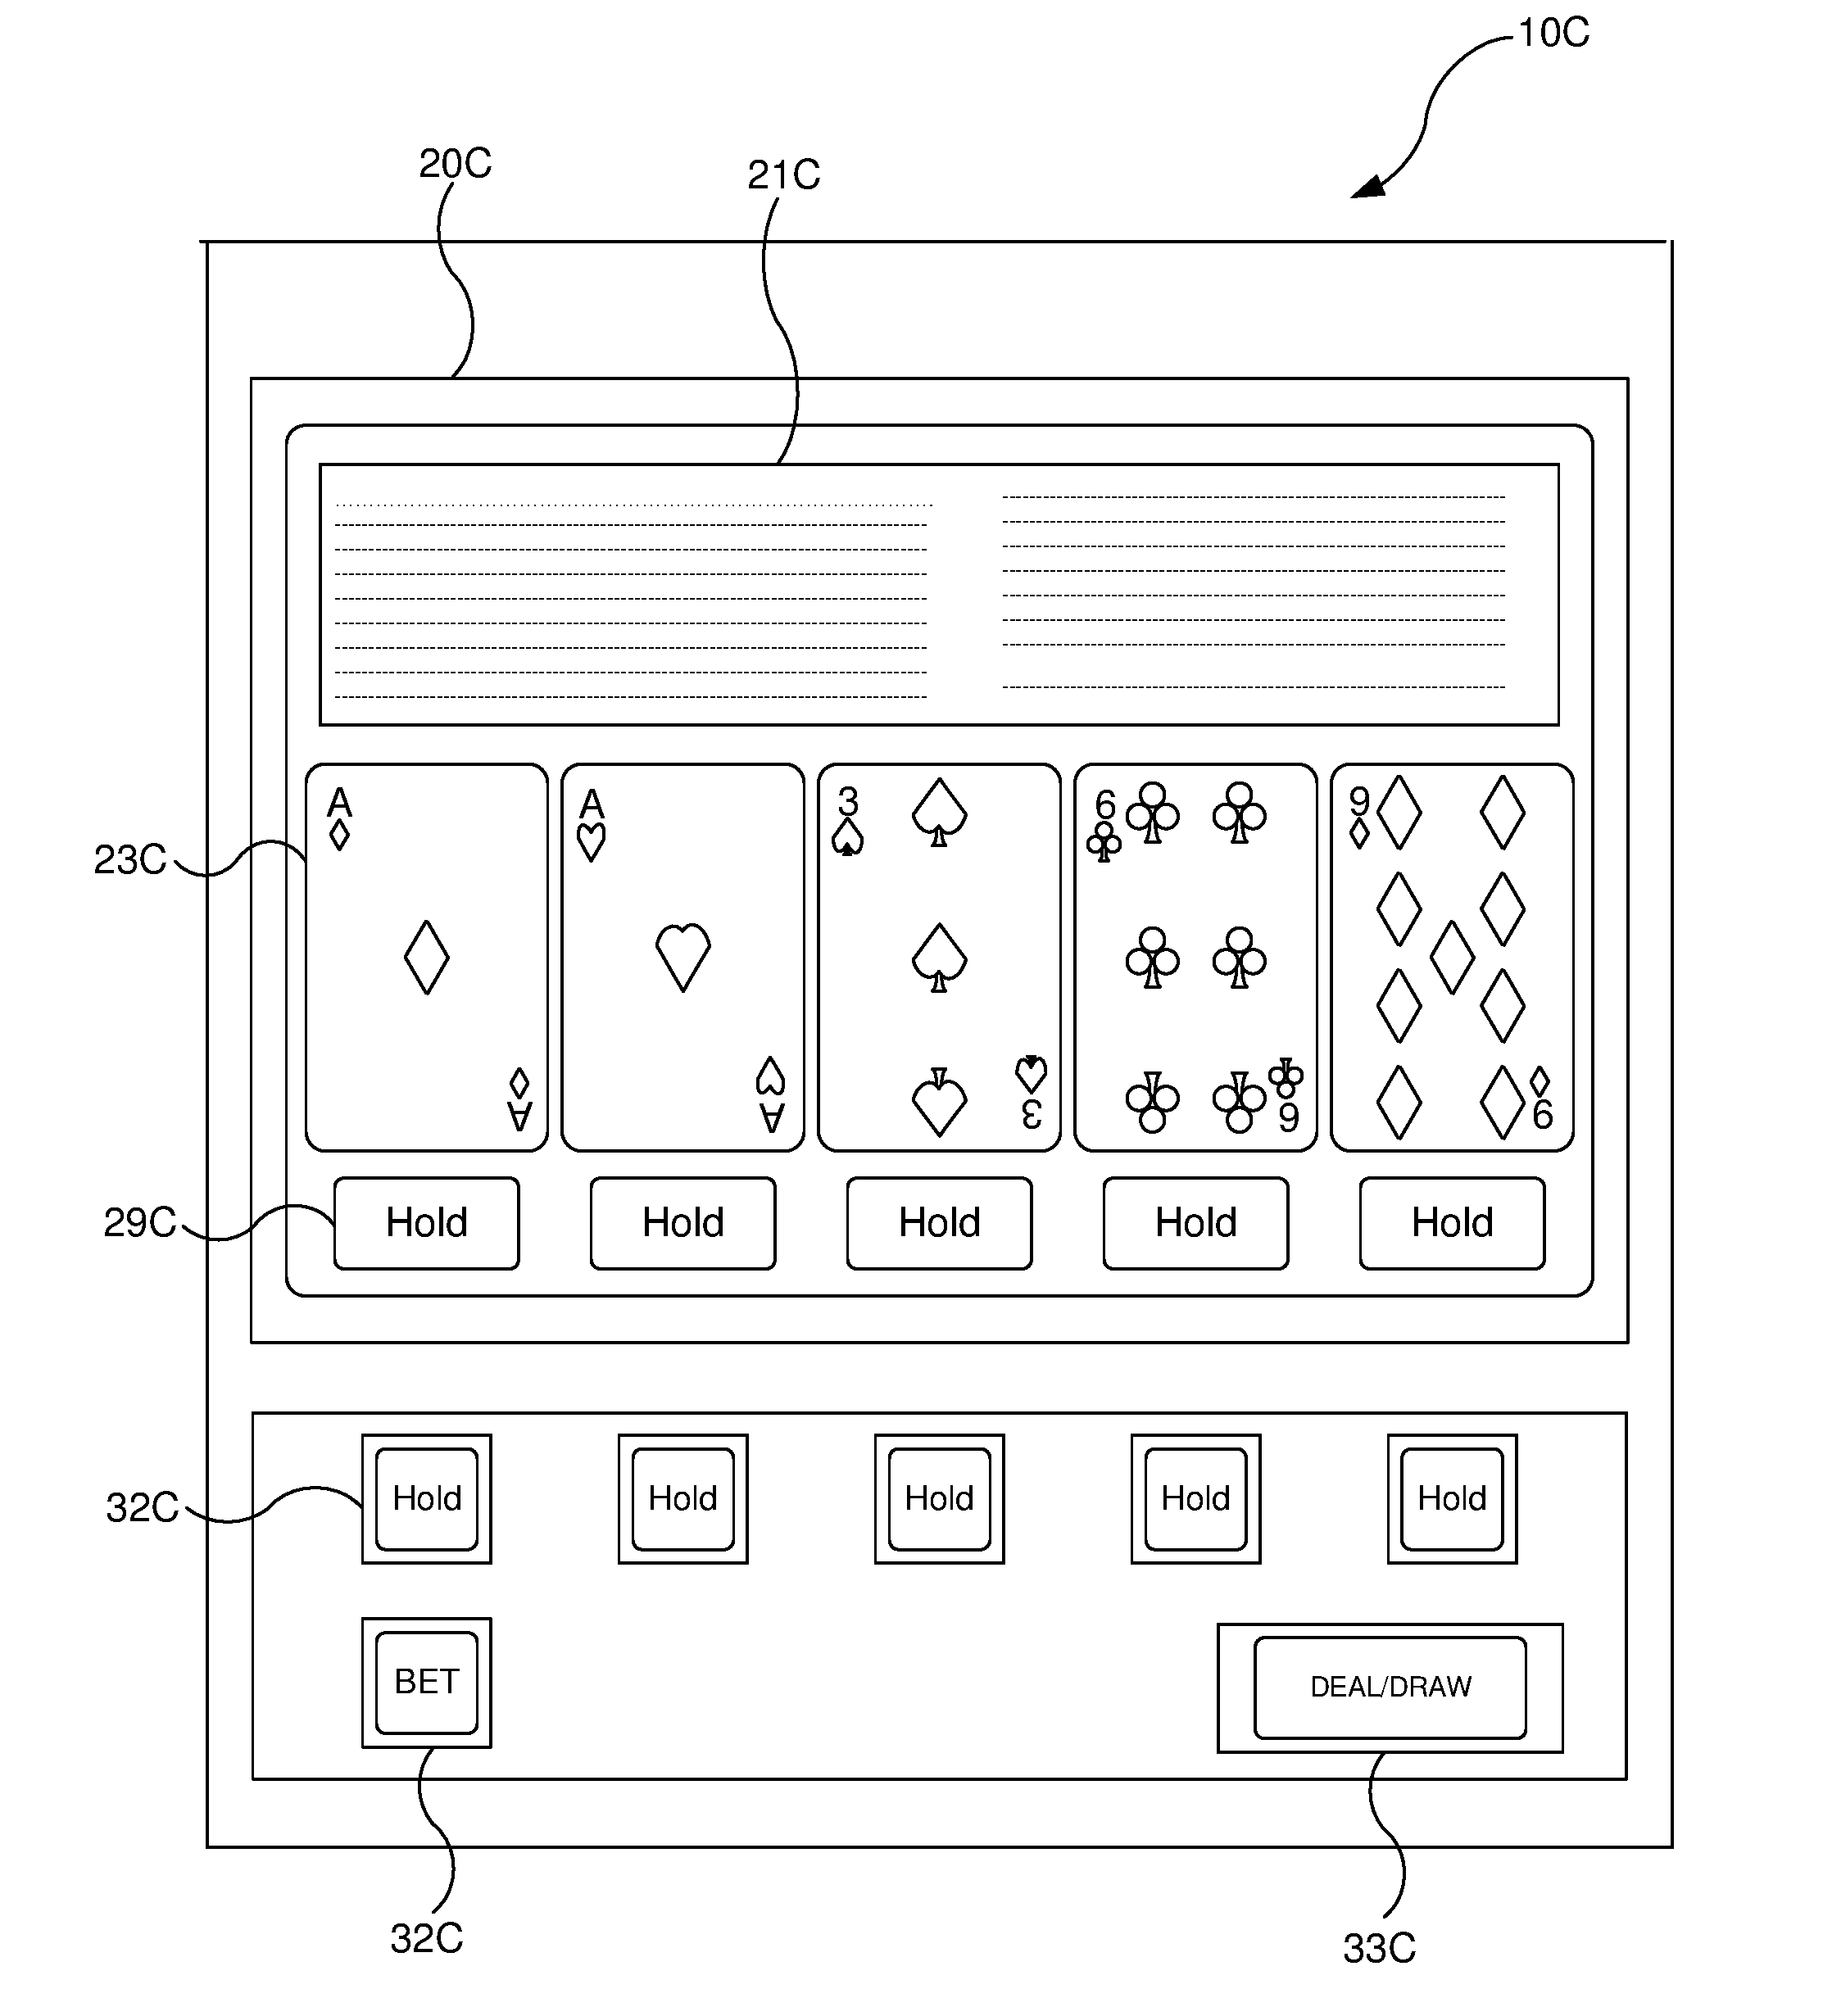 Method for sharing game play on an electronic gaming device